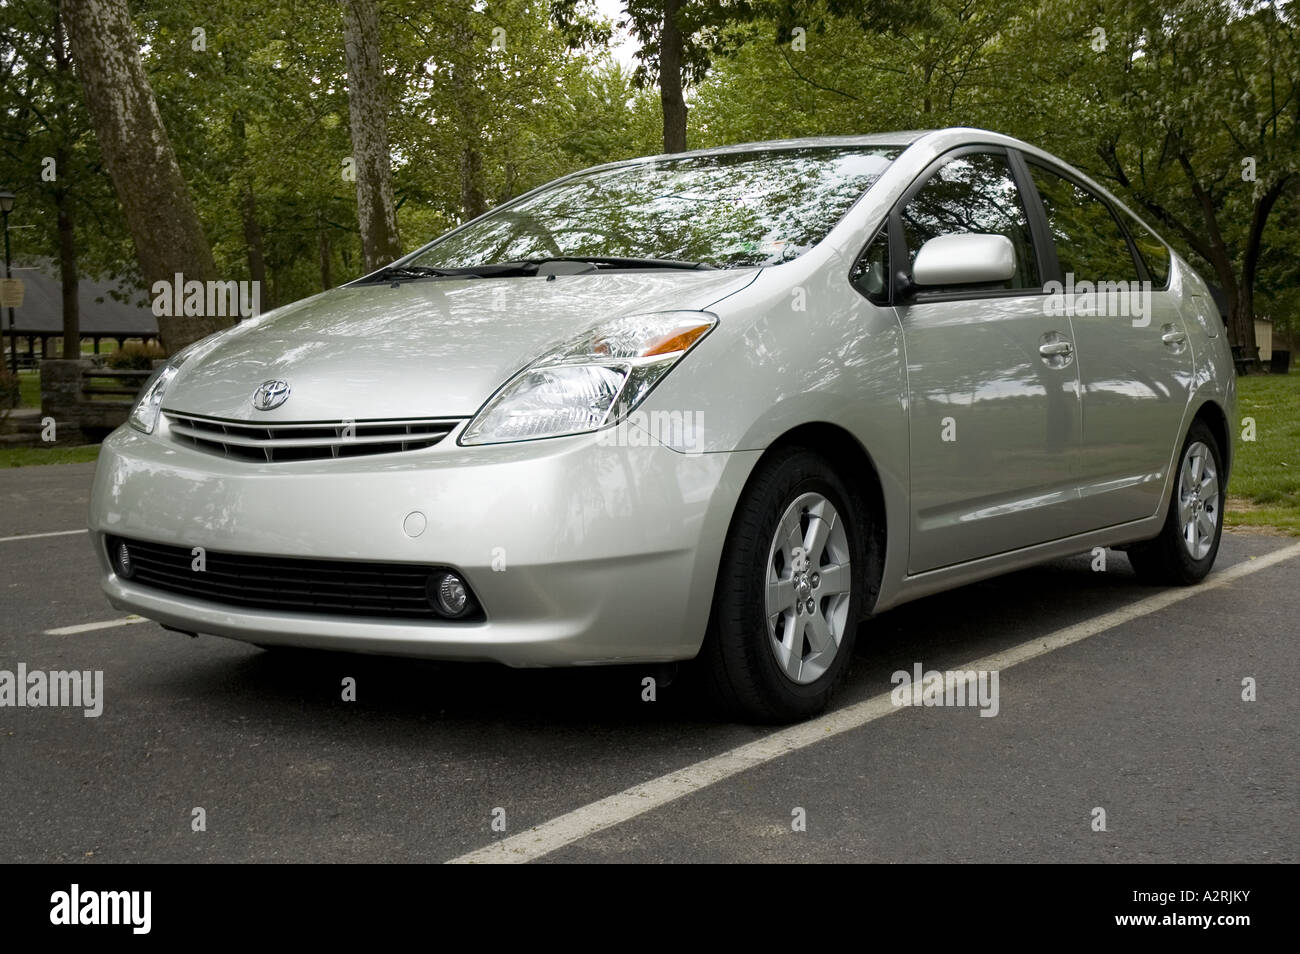 2004 TOYOTA PRIUS GASOLINE-ELECTRIC HYBRID CAR WHICH USES GASOLINE TO POWER AN INTERNAL-COMBUSTION ENGINE AND ELECTRIC BATTERIES Stock Photo